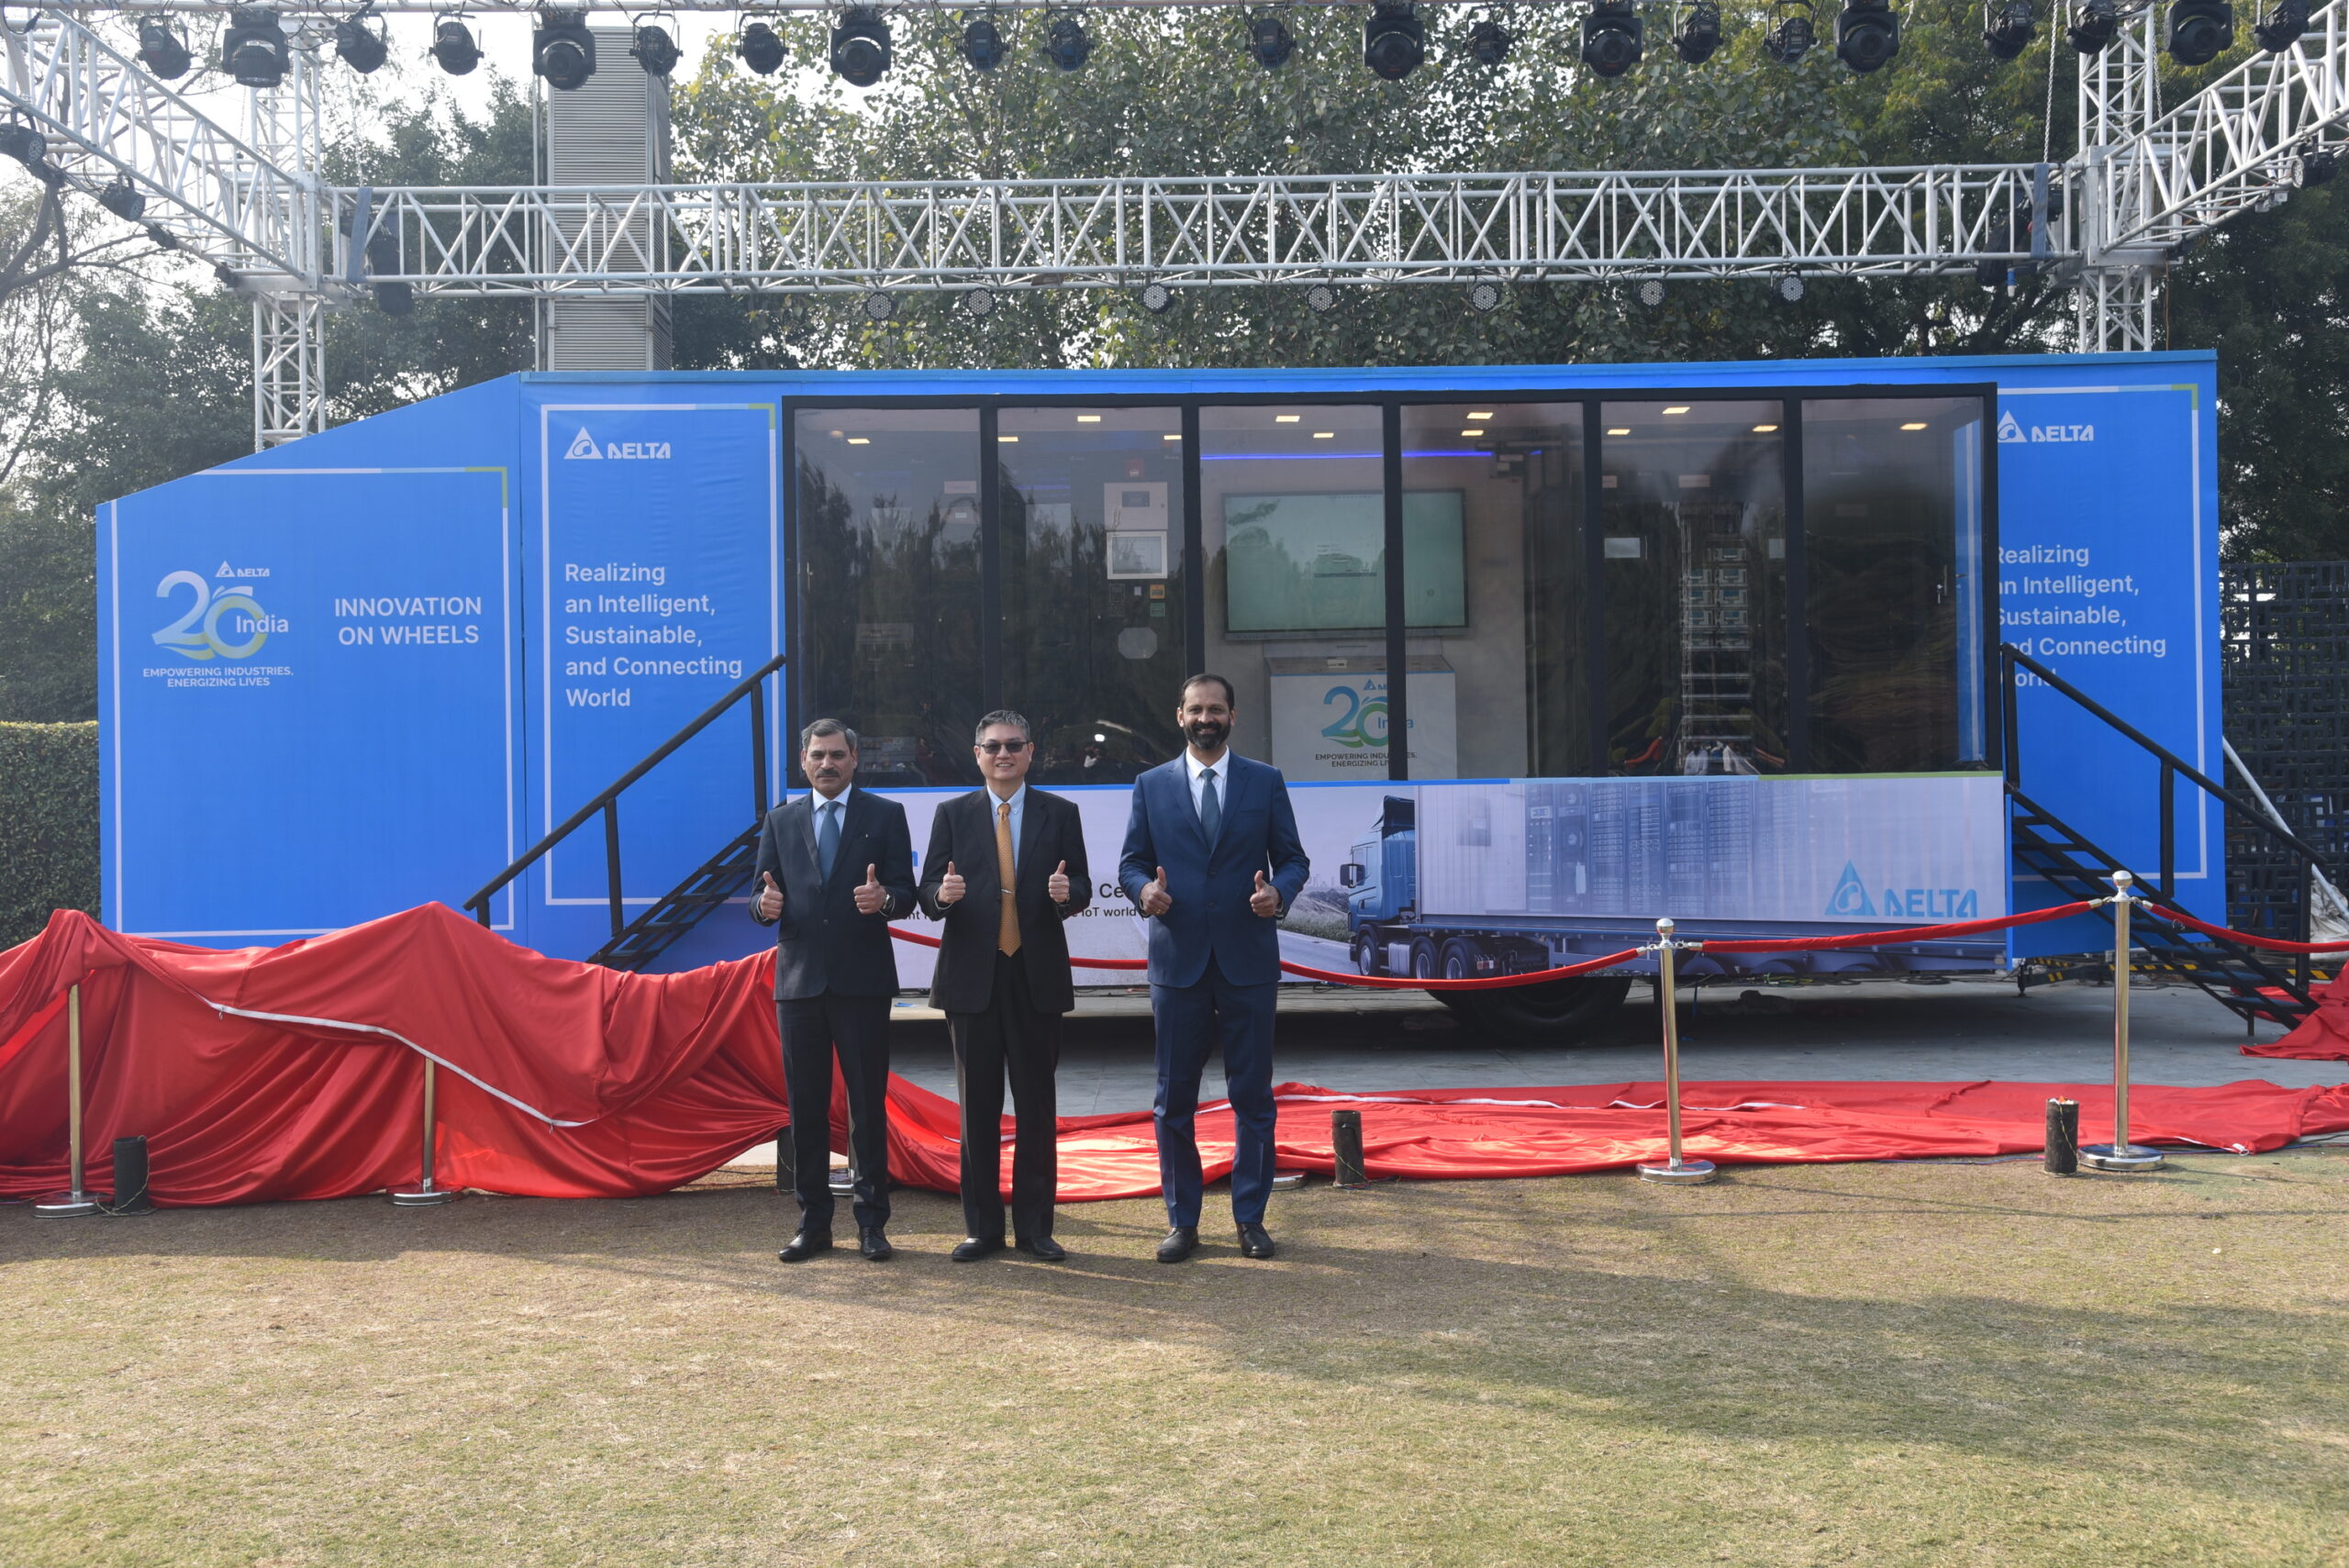 Delta Marks 20 Years in India with Innovation on Wheels Tour